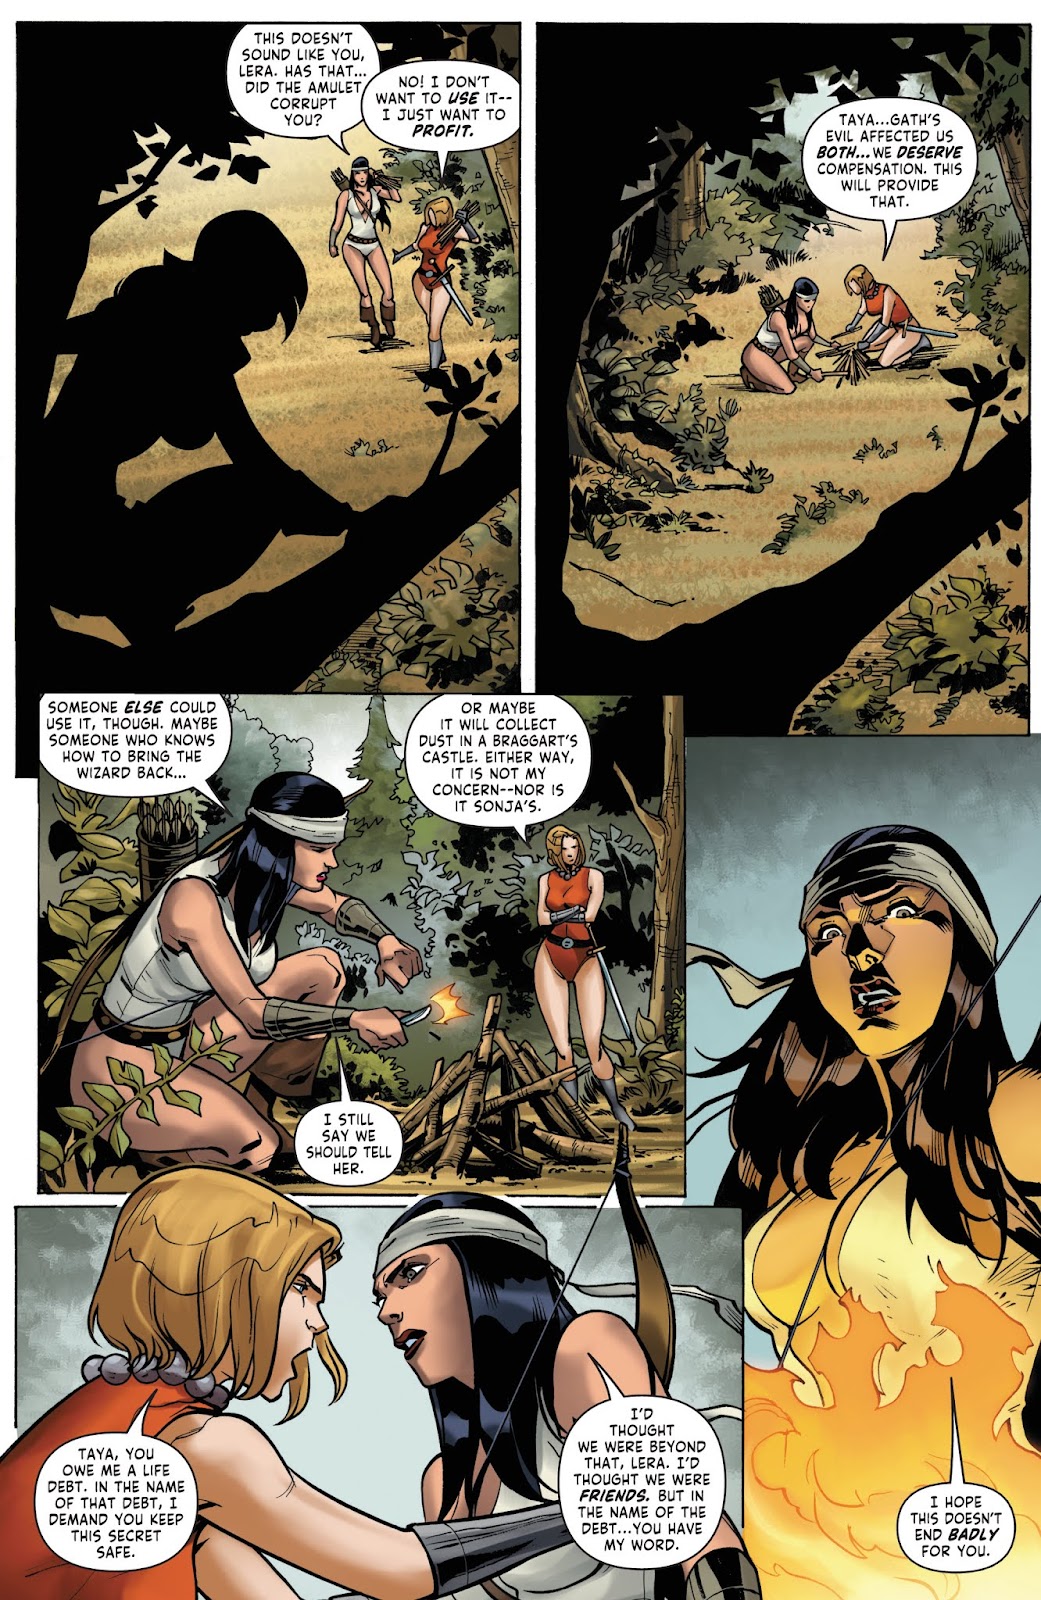 Red Sonja Vol. 4 issue 18 - Page 16